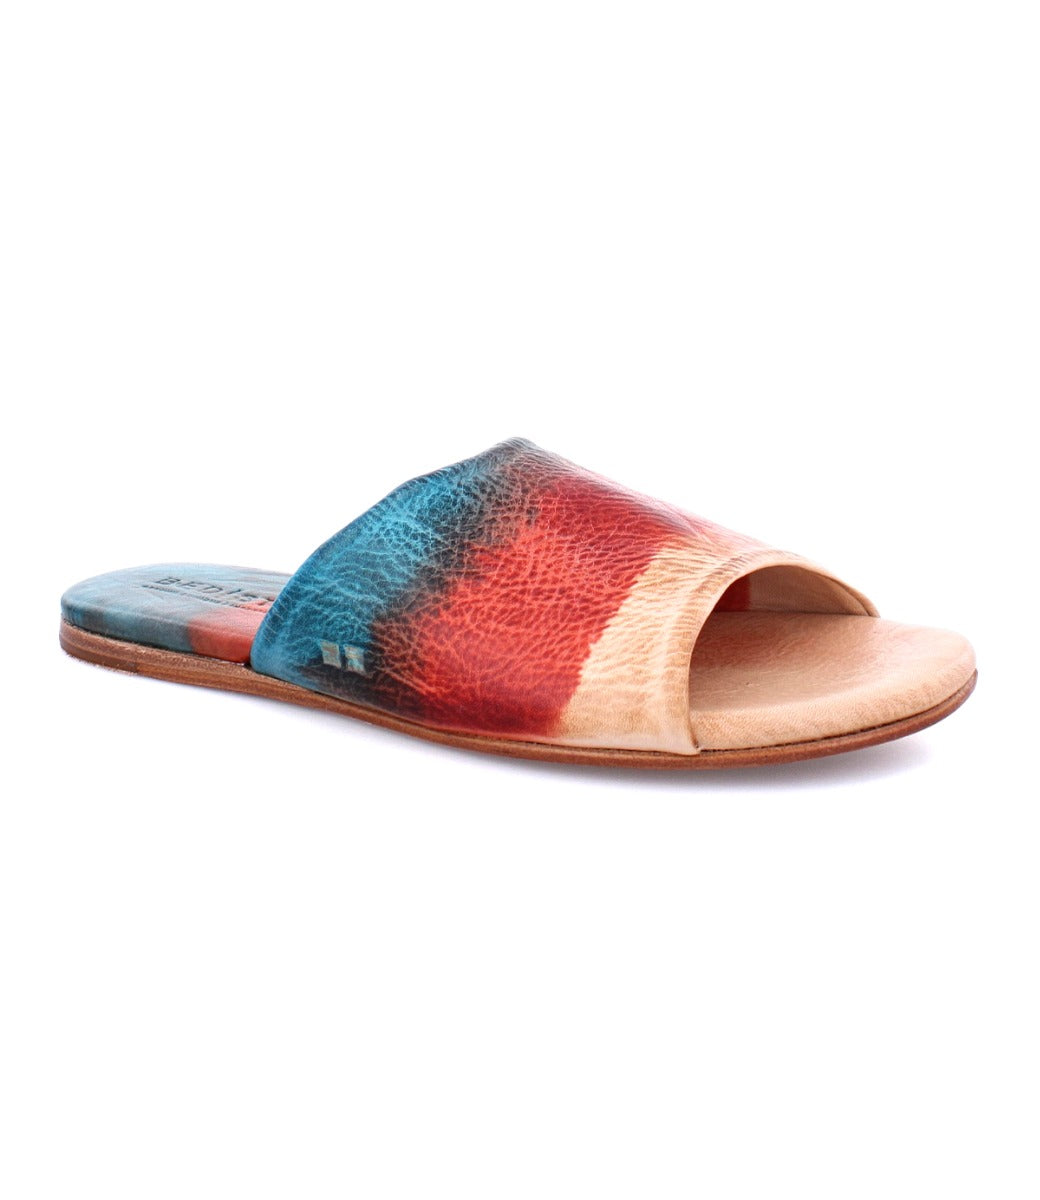 The Gia women's colorful pure leather slide on sandals by Bed Stu.